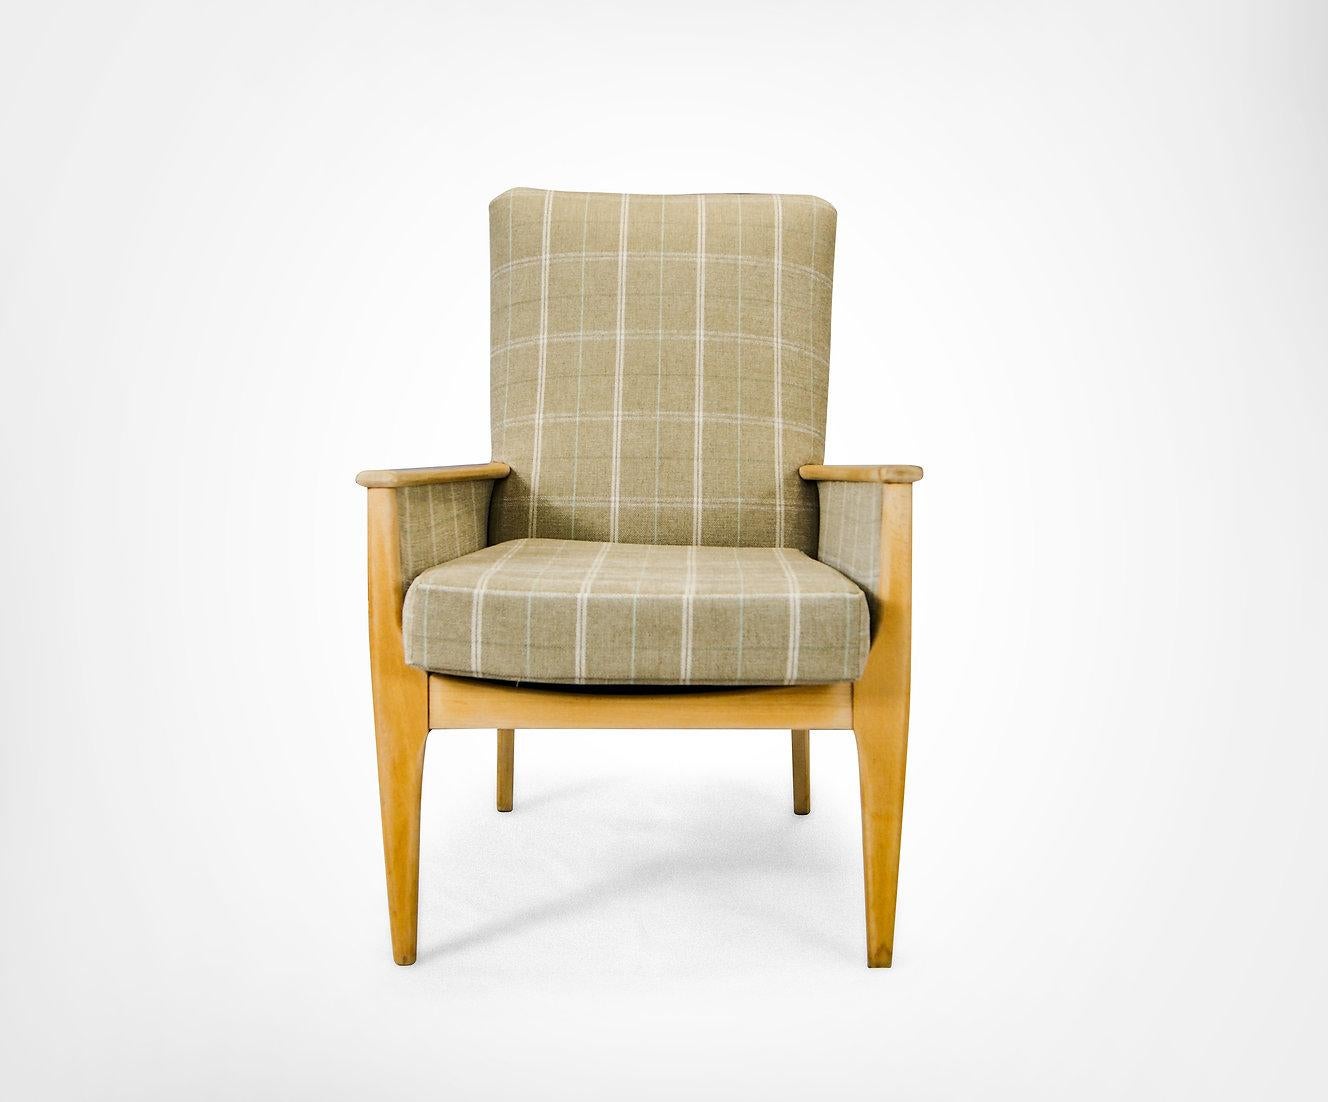 Rarely seen mid-century Parker Knoll club chairs
Model number 988/1023.
Very roomy and comfortable chairs.
In solid Teak.
These were commissioned by the Plymouth Royal Marina & Yacht Club.
Professionally re-upholstered to a high standard in